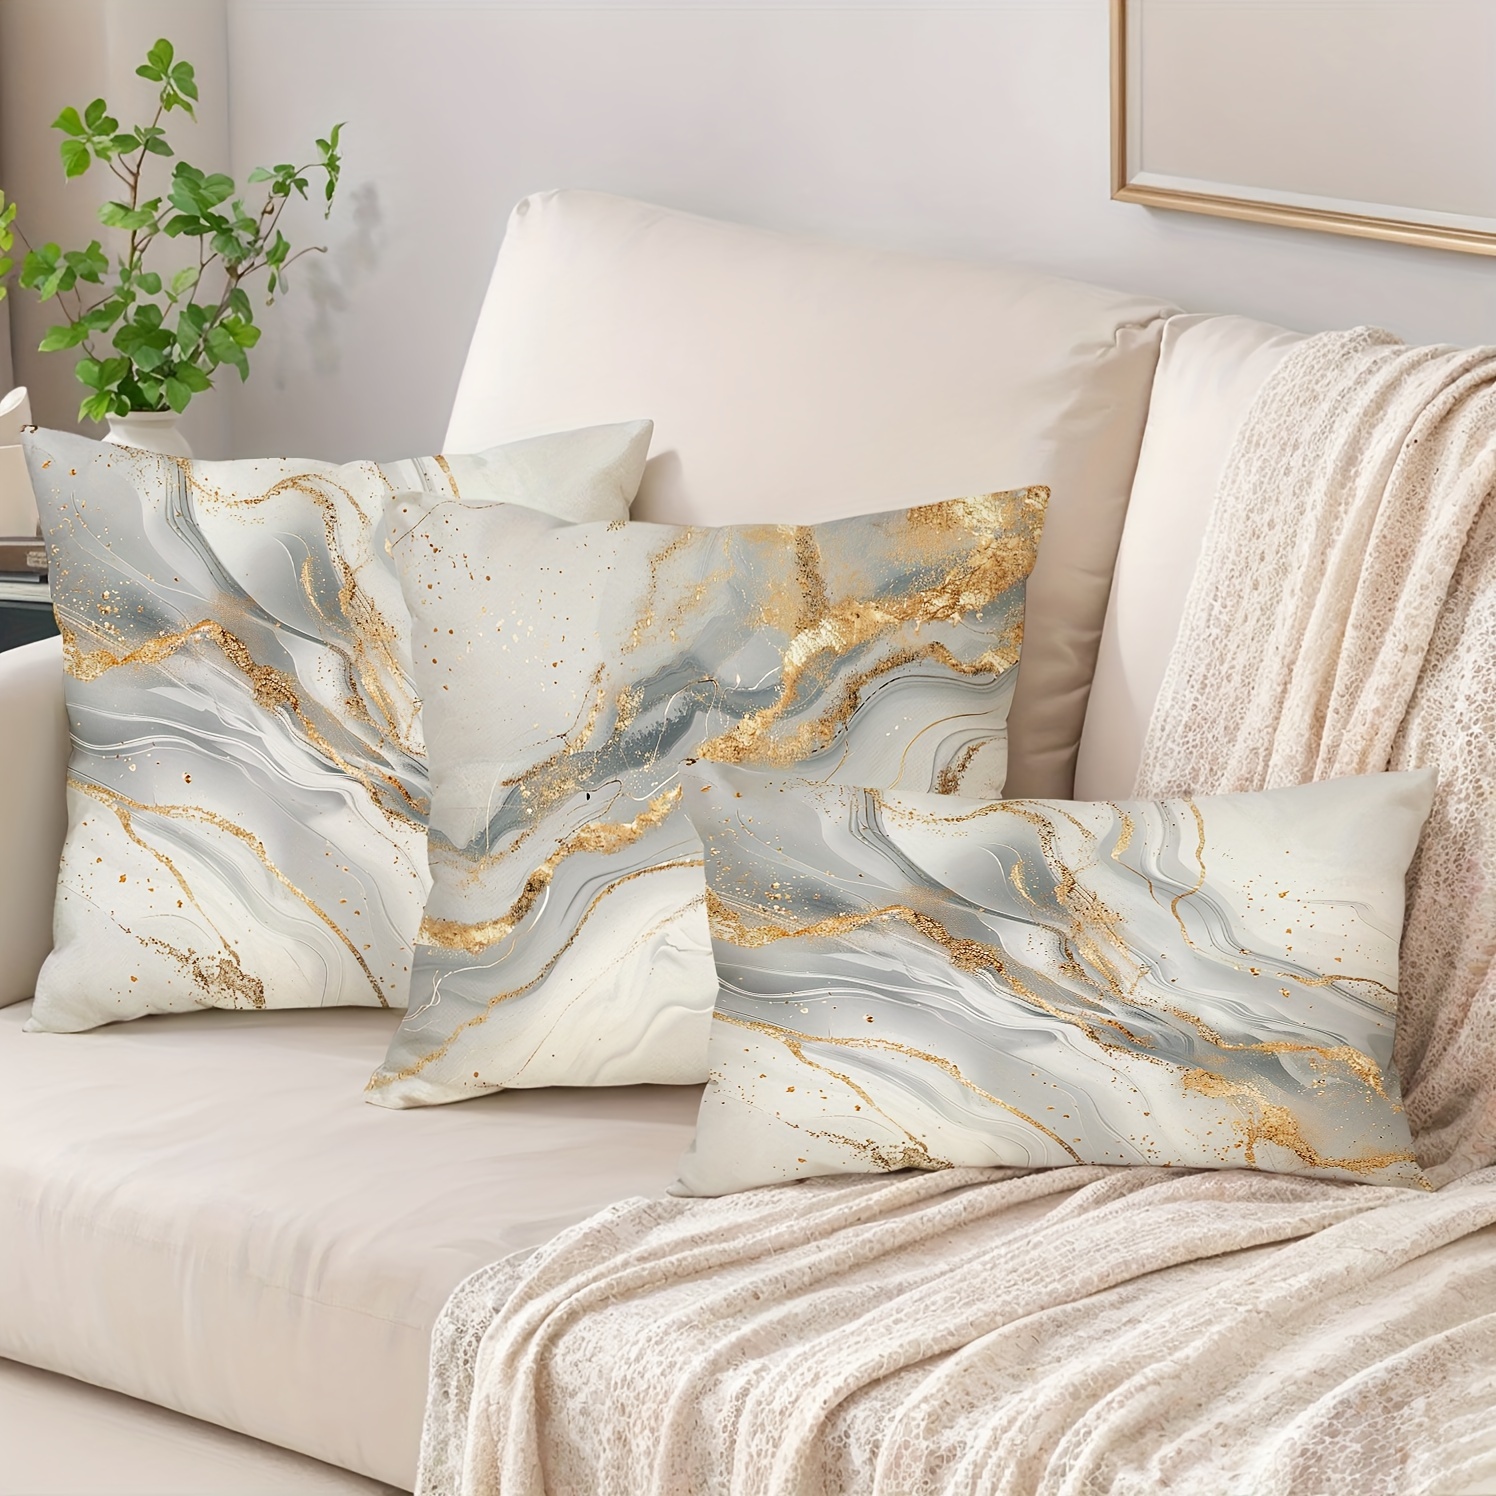 

2-piece Elegant White & Marble Pattern Throw Pillow Covers - Contemporary Abstract Design, Farmhouse Style Linen Blend Cushion Cases For Sofa, Patio, And Living Room Decor - Zip Closure